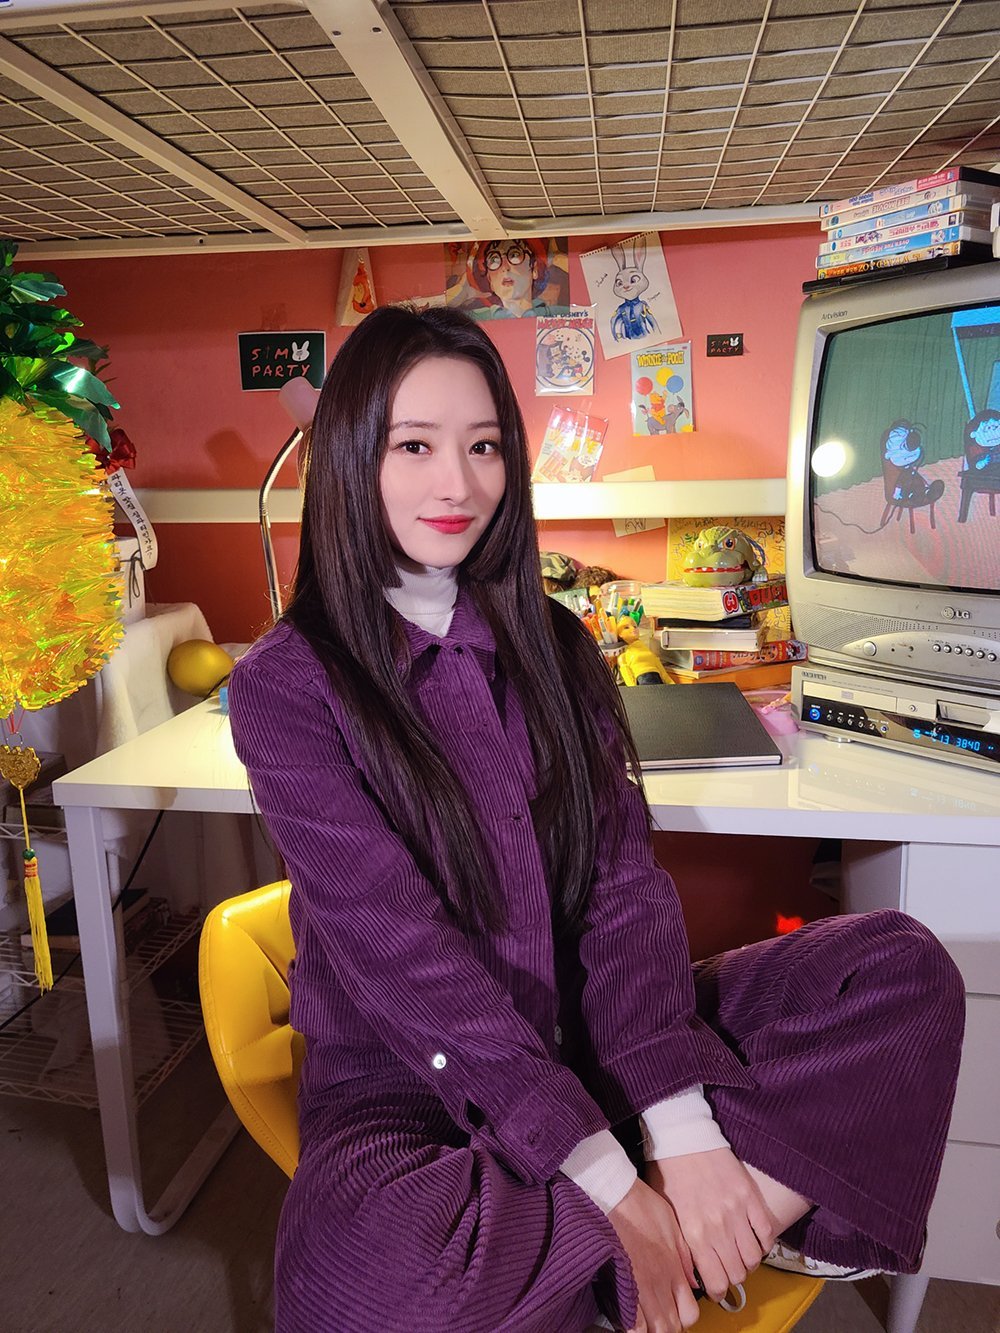 [201208] hf_dreamcatcher Twitter Update (½):
“[🎁] Before you go look at photos of Dreamies❤️
#Sua’s cover video
Behind the scenes selfie release❗❗
If you want to see👶🏻
Maknae Sua❗❓
🔽🔽
han.gl/XfEBs
”
Transl: 7-Dreamers HojuneTL | Please do not take...